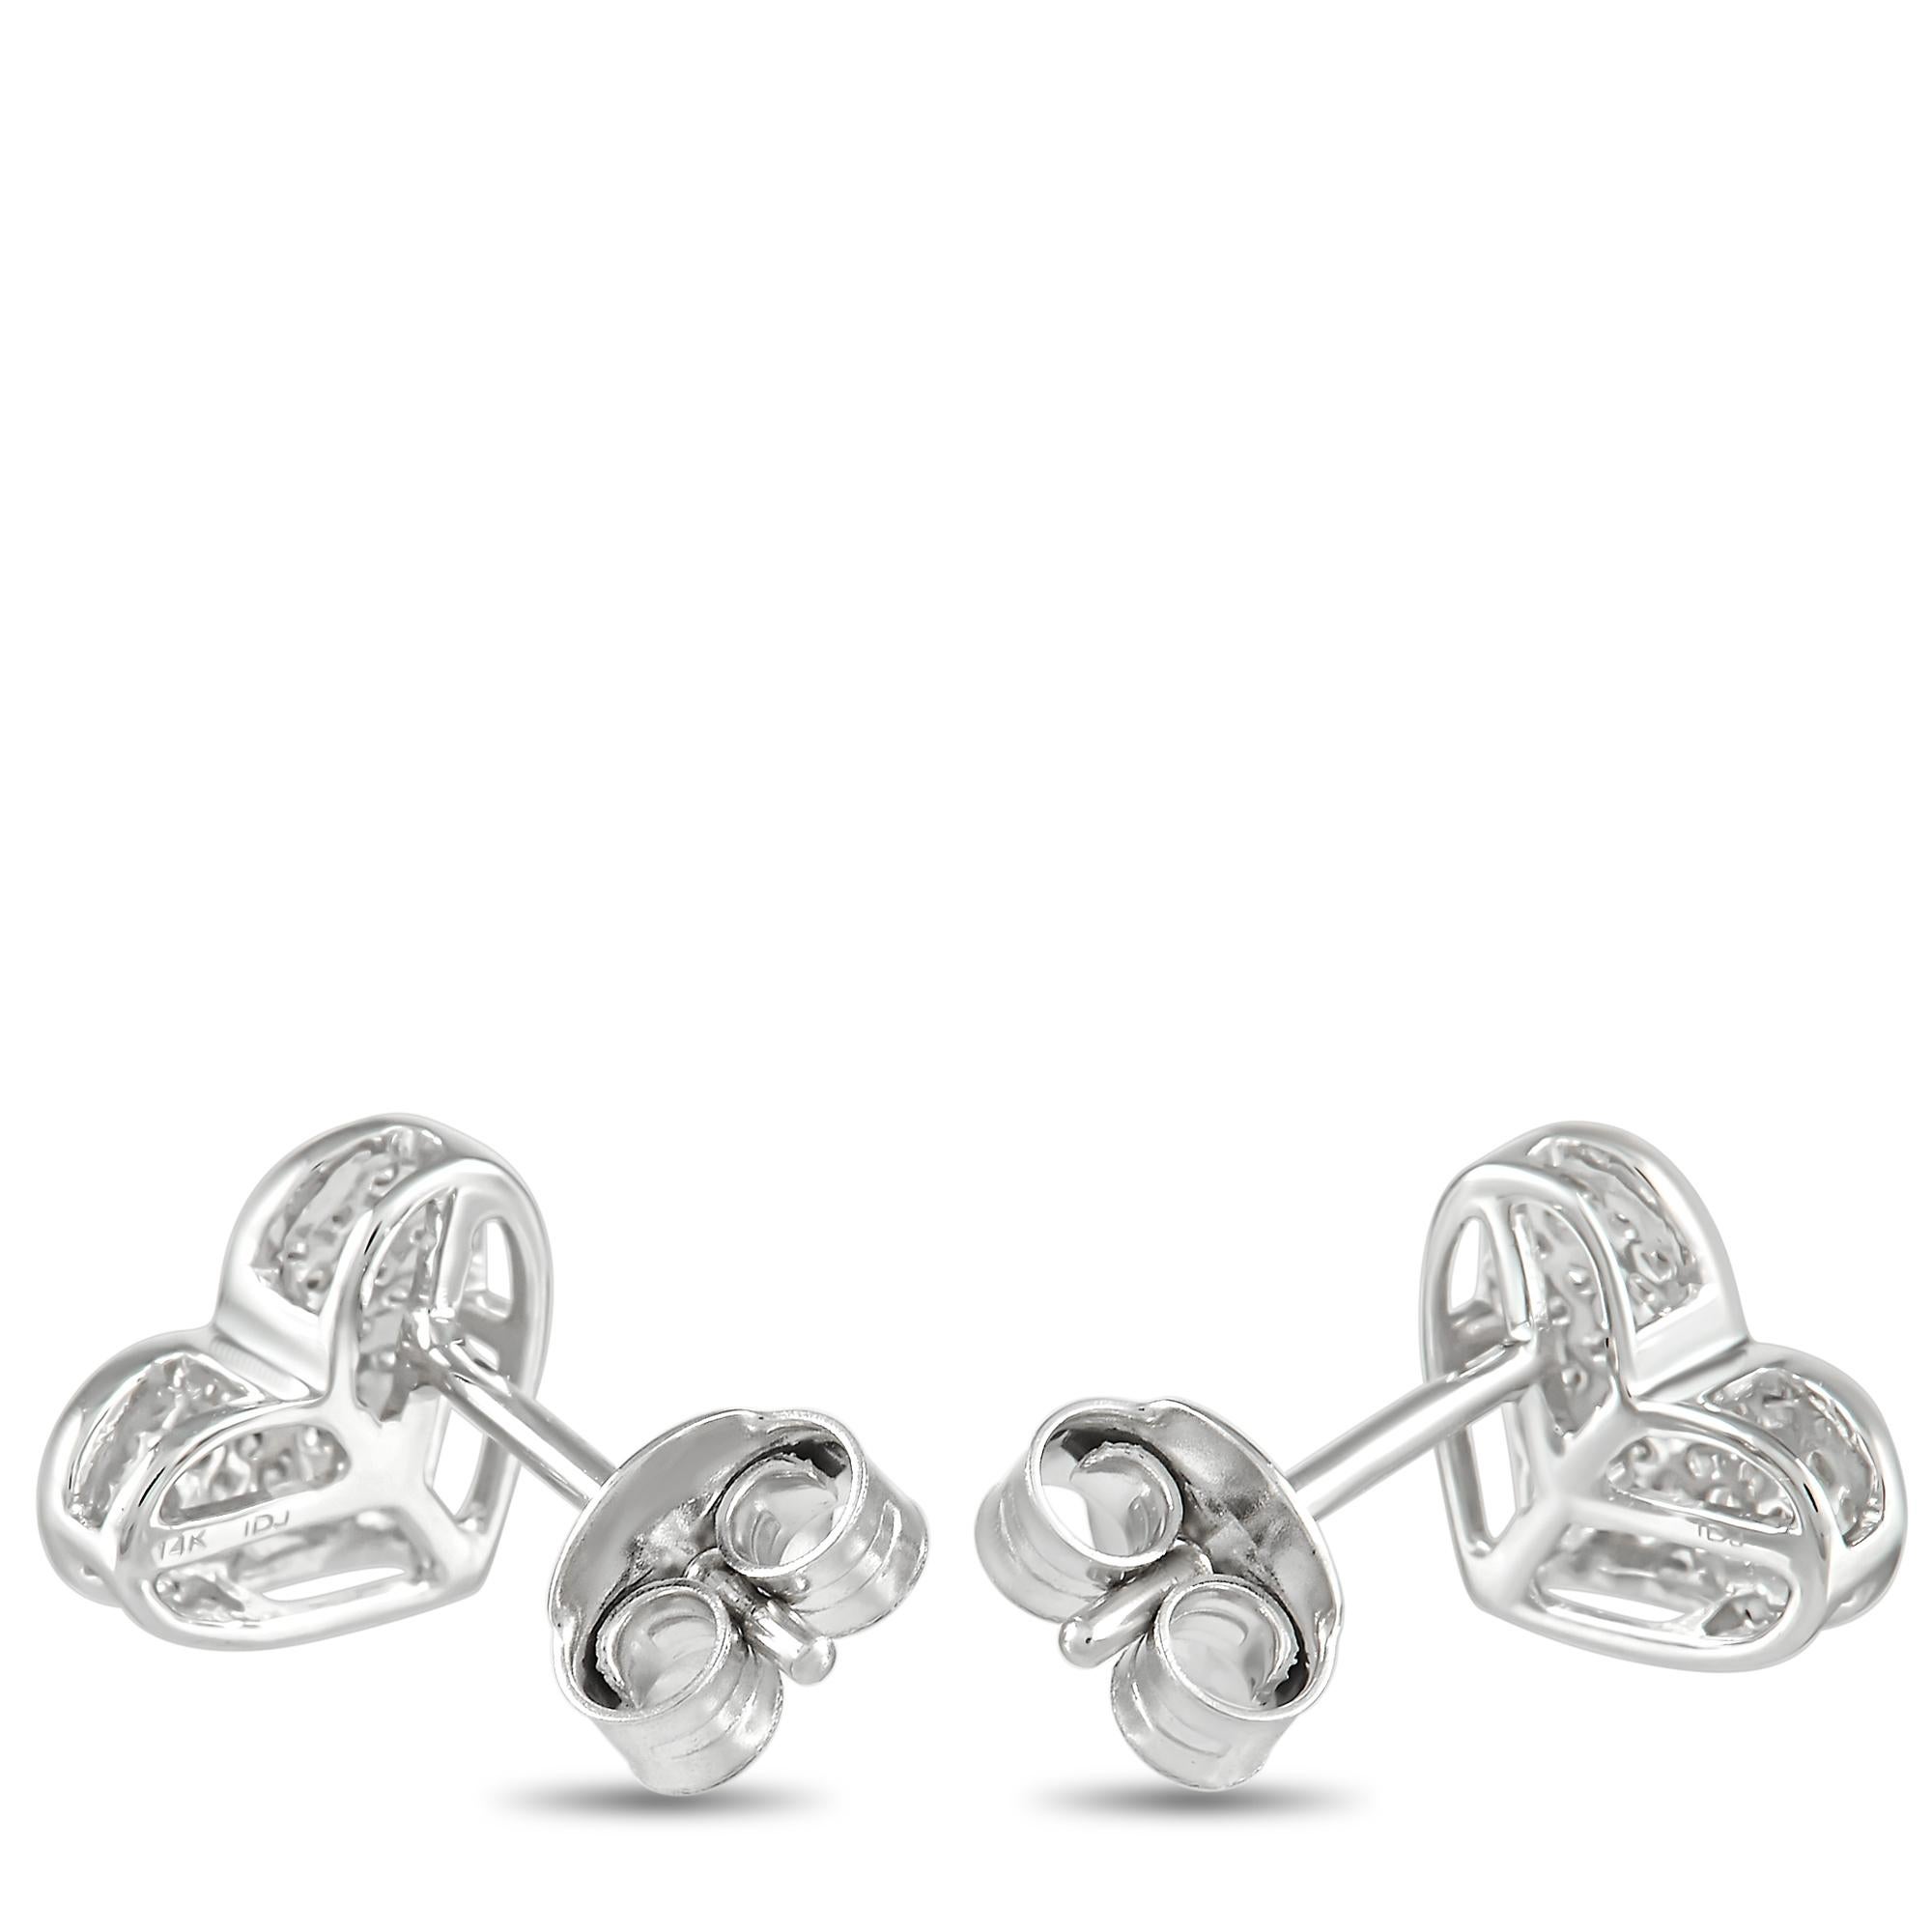 These pretty LB Exclusive earrings will put a smile on your face. The earrings are made from 14K white gold, forming a cute heart-shaped stud. The face of each heart is set with round-cut diamonds over the face of each earring, for a total of 0.16